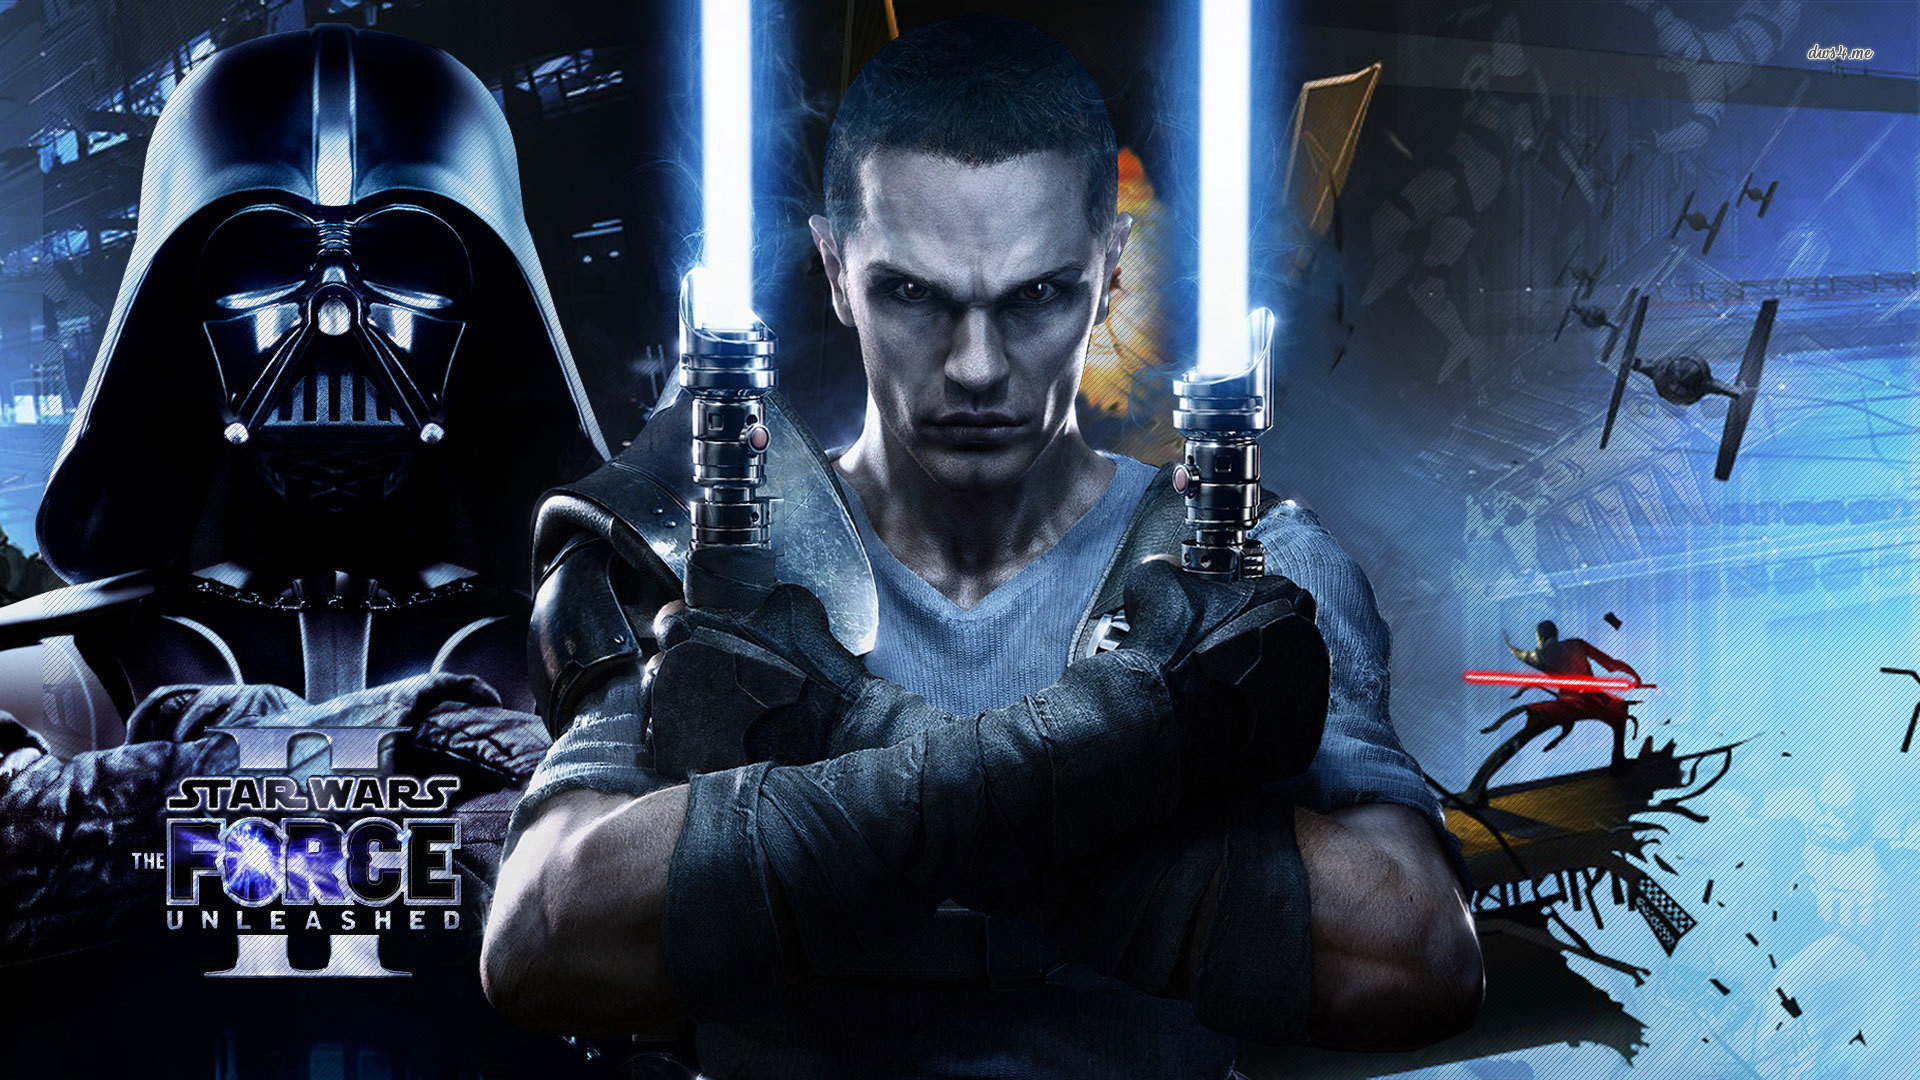 Starkiller And Darth Vader In Star Wars - Star Wars The Force Unleashed Wallpaper Hd - HD Wallpaper 